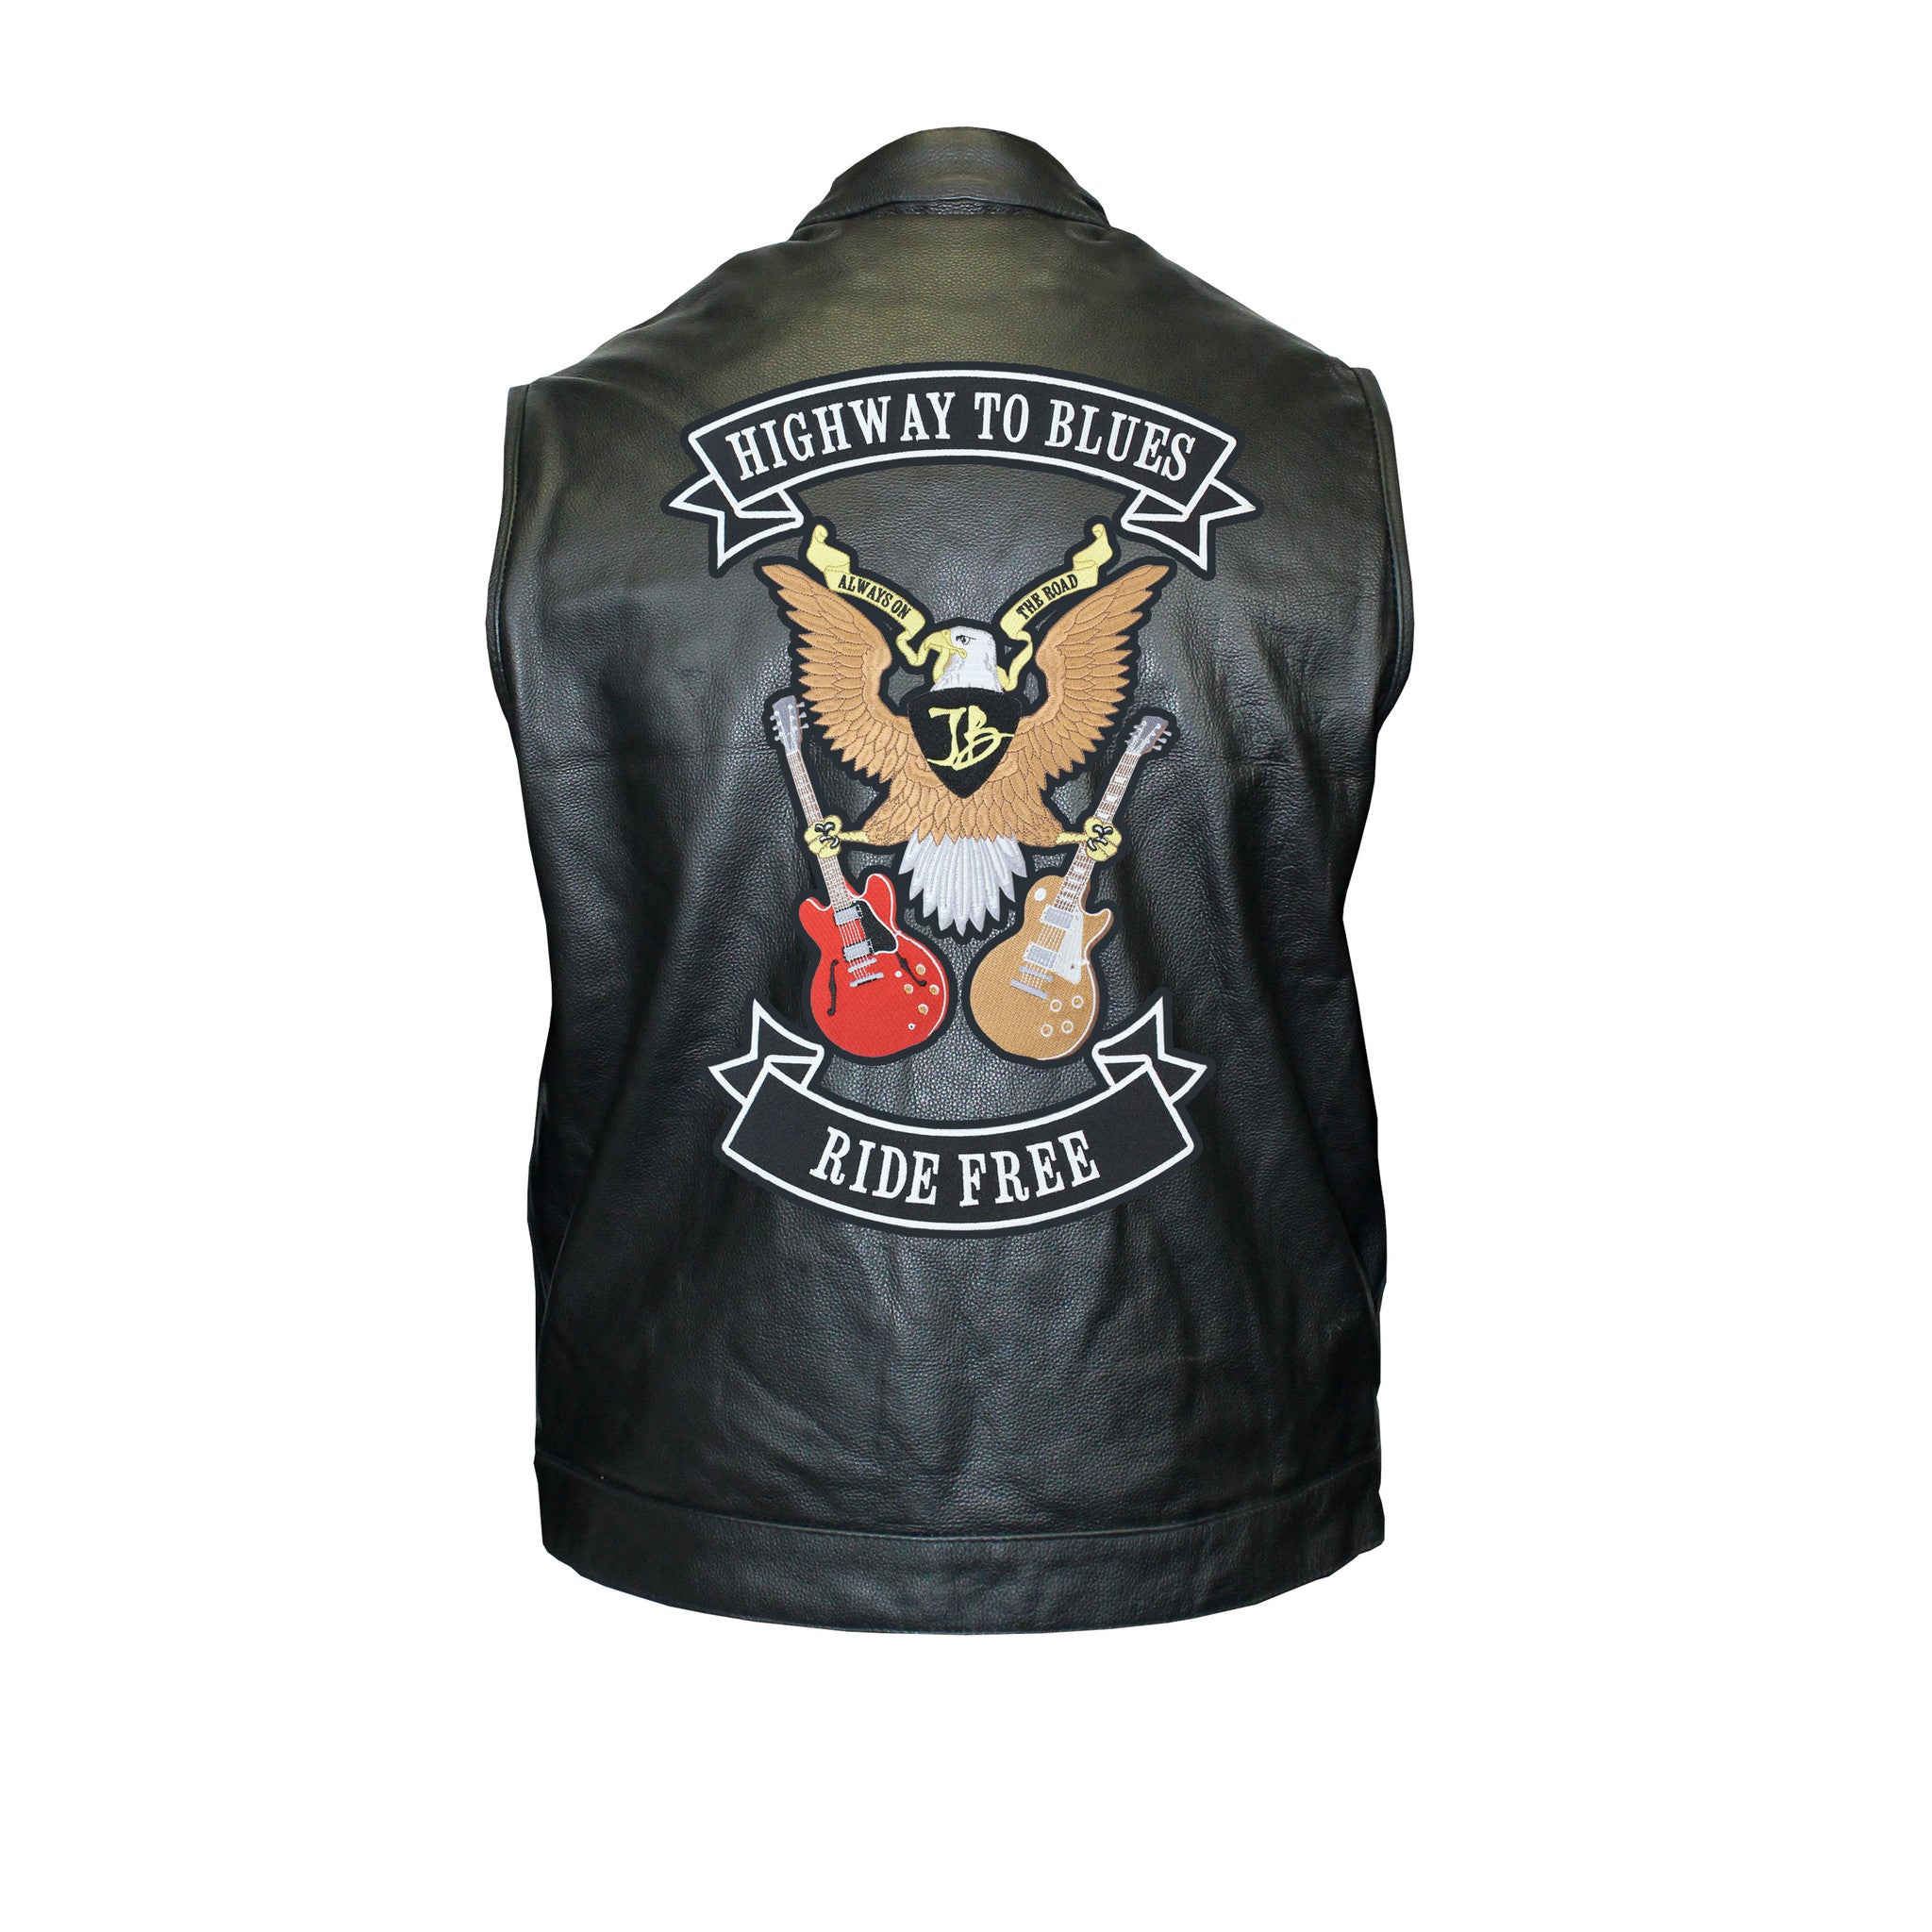 Motorcycle Club Back Patches